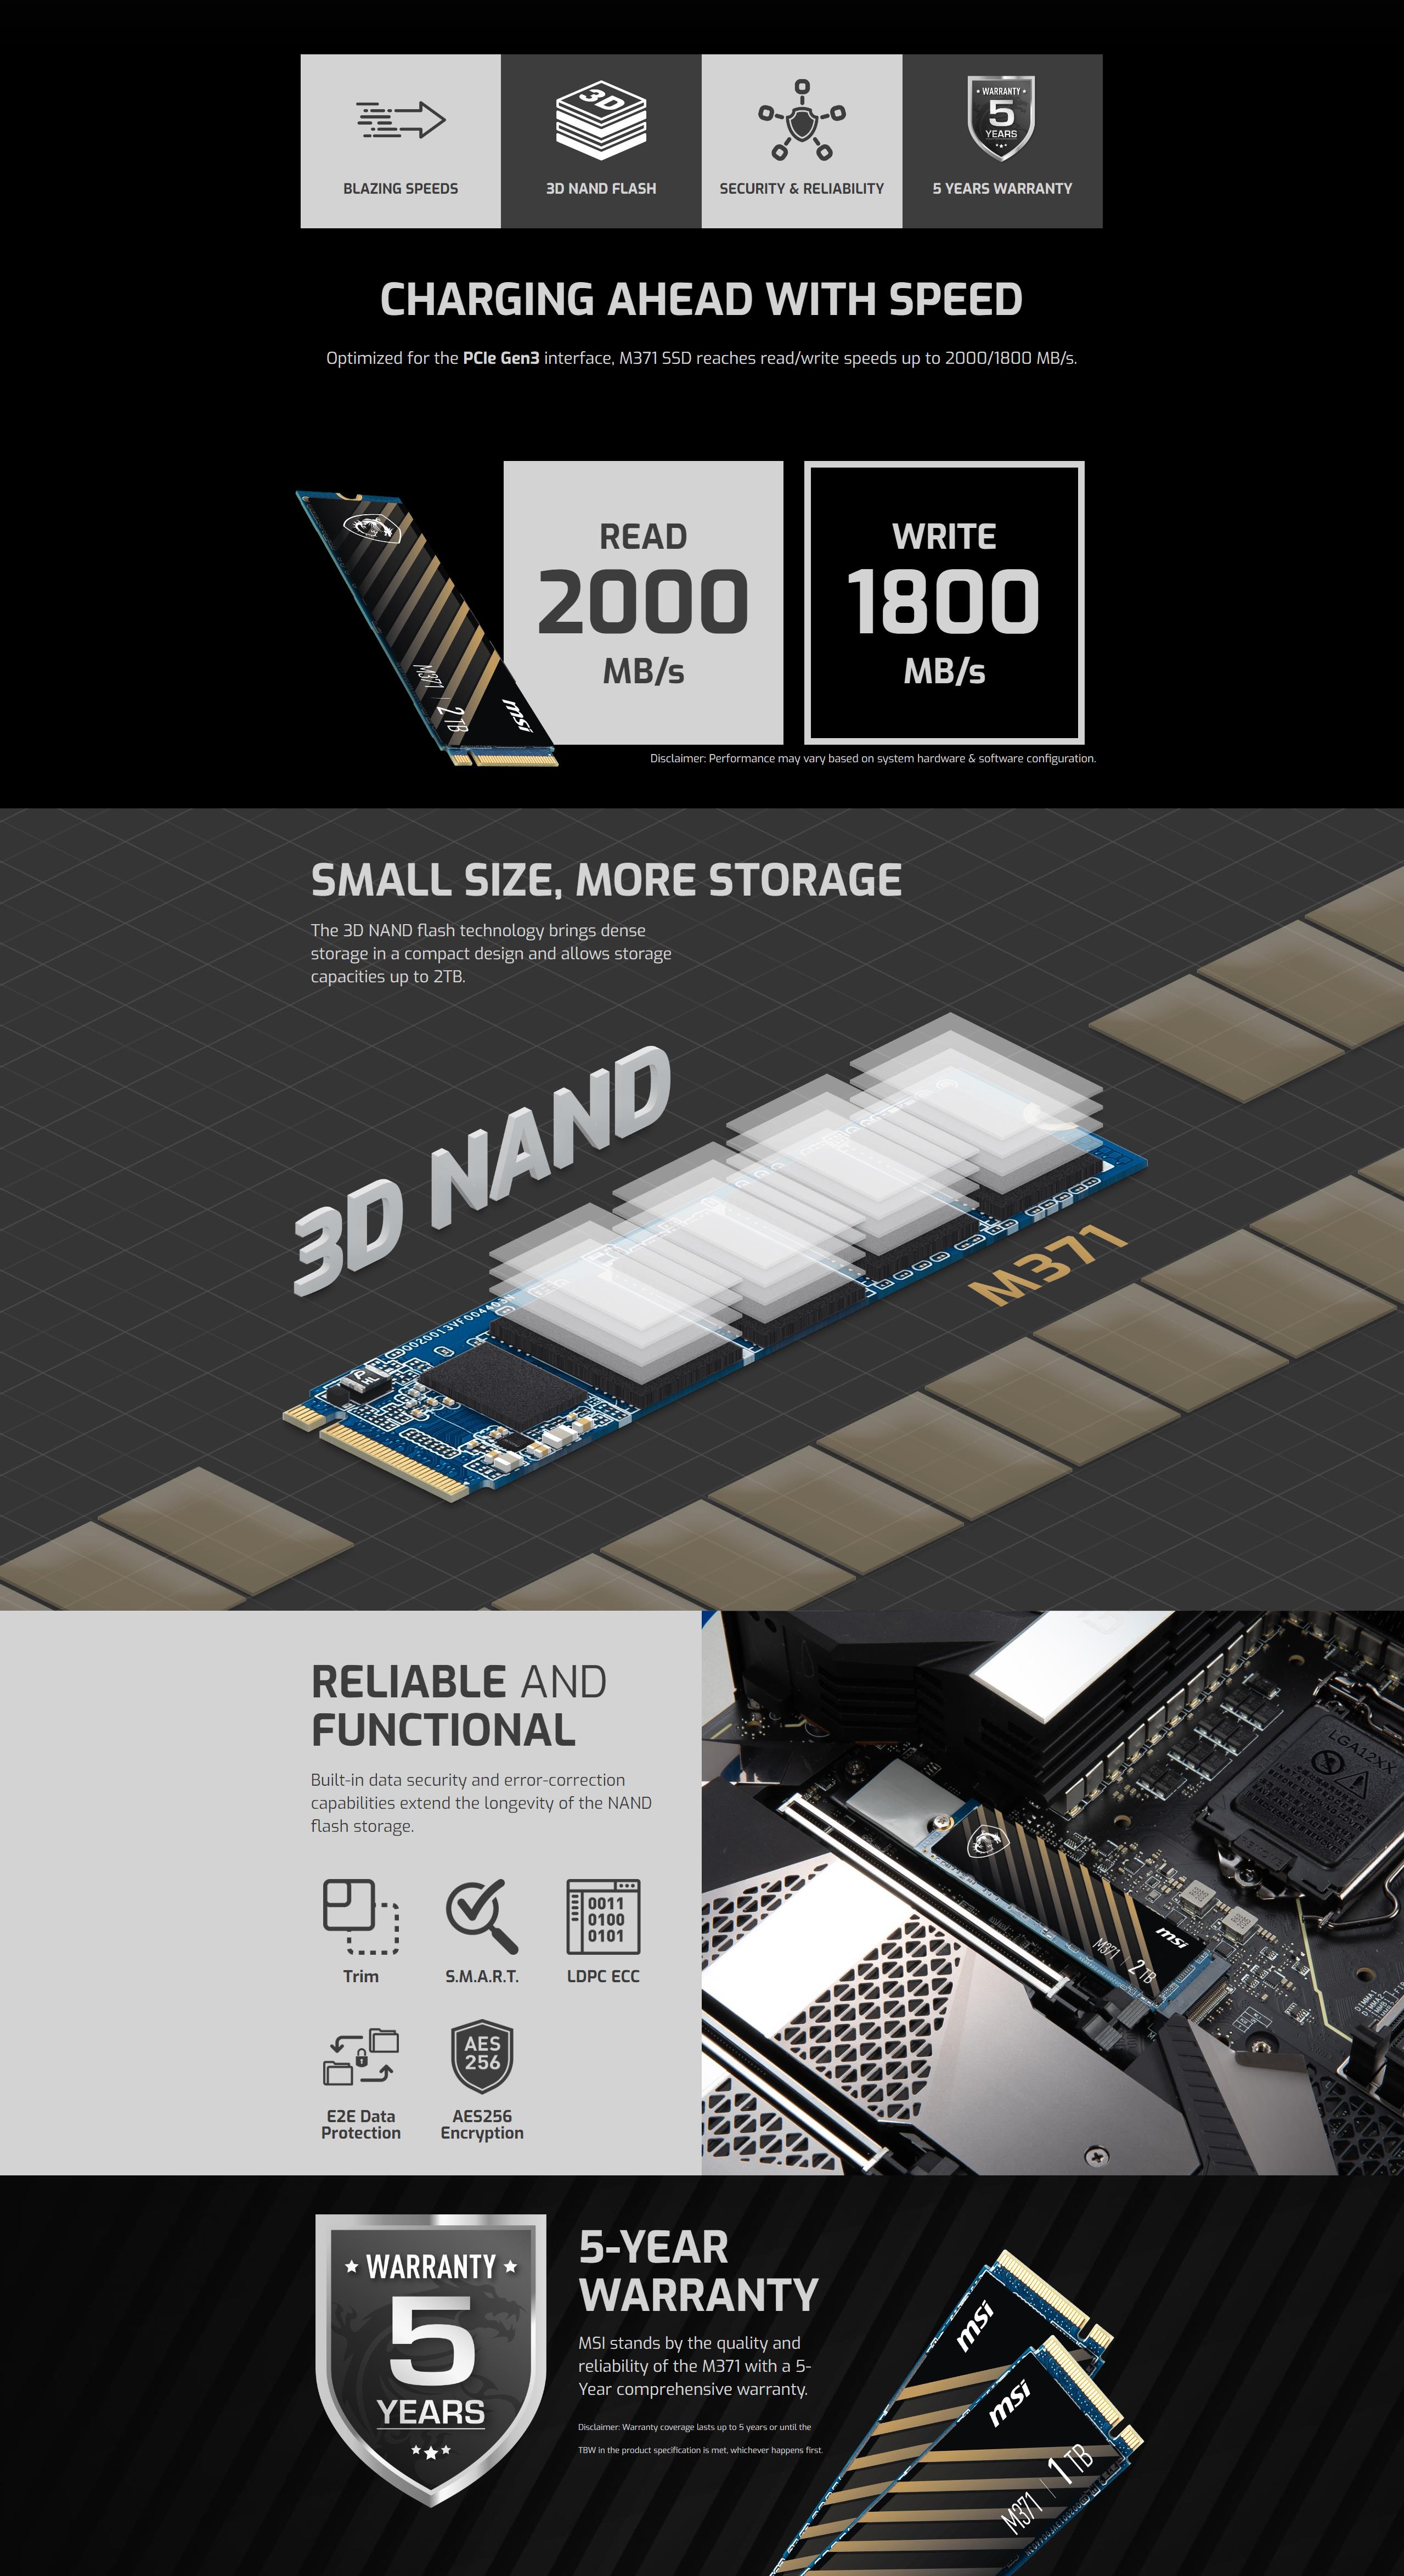 A large marketing image providing additional information about the product MSI Spatium M371 PCIe Gen3 NVMe M.2 SSD - 500GB - Additional alt info not provided